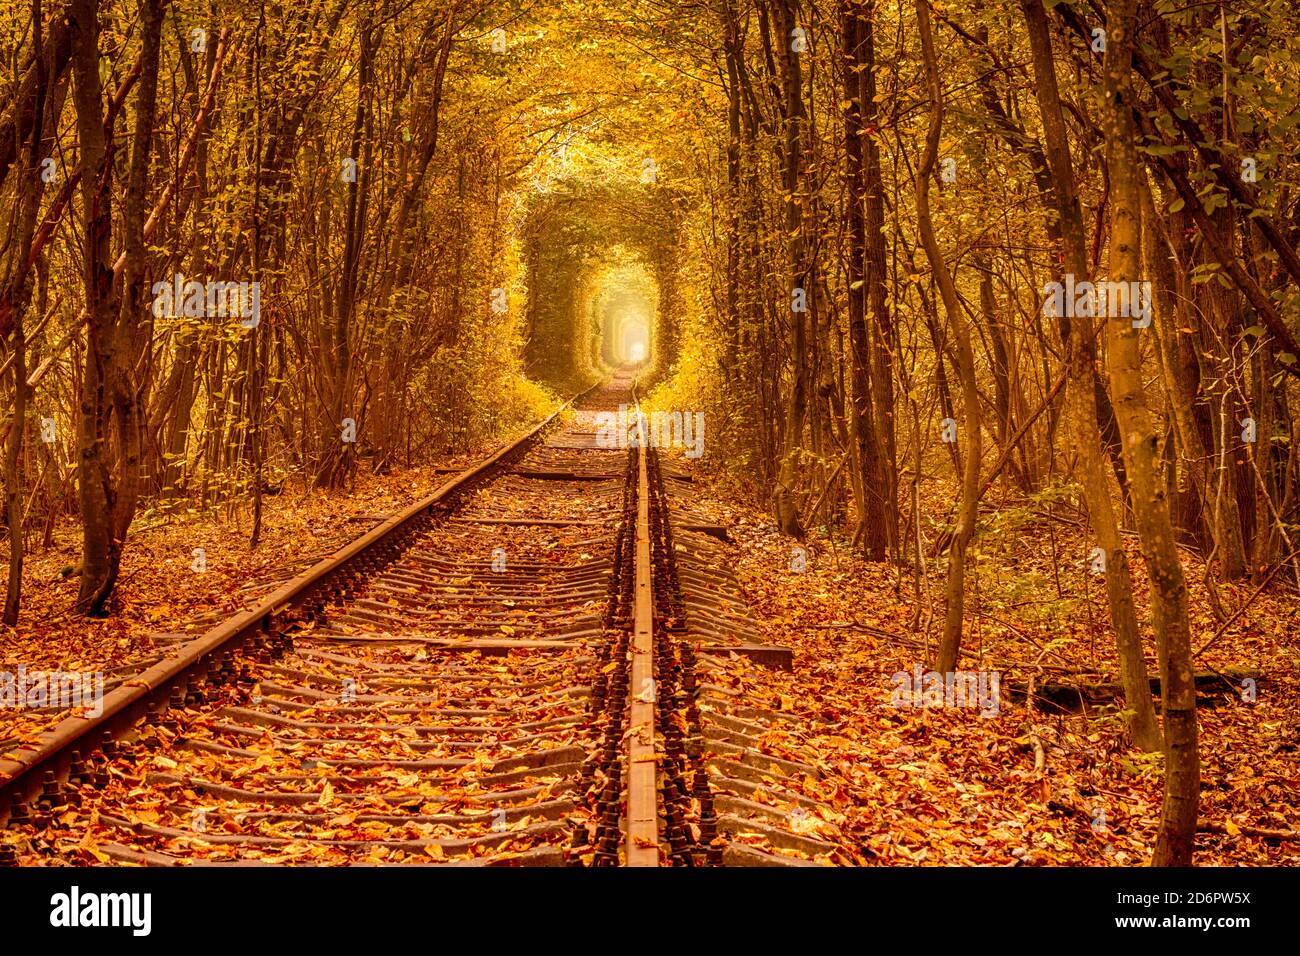 Tunnel of love in Ukraine. Railroad tracks through deciduous forest. Autumn day Stock Photo